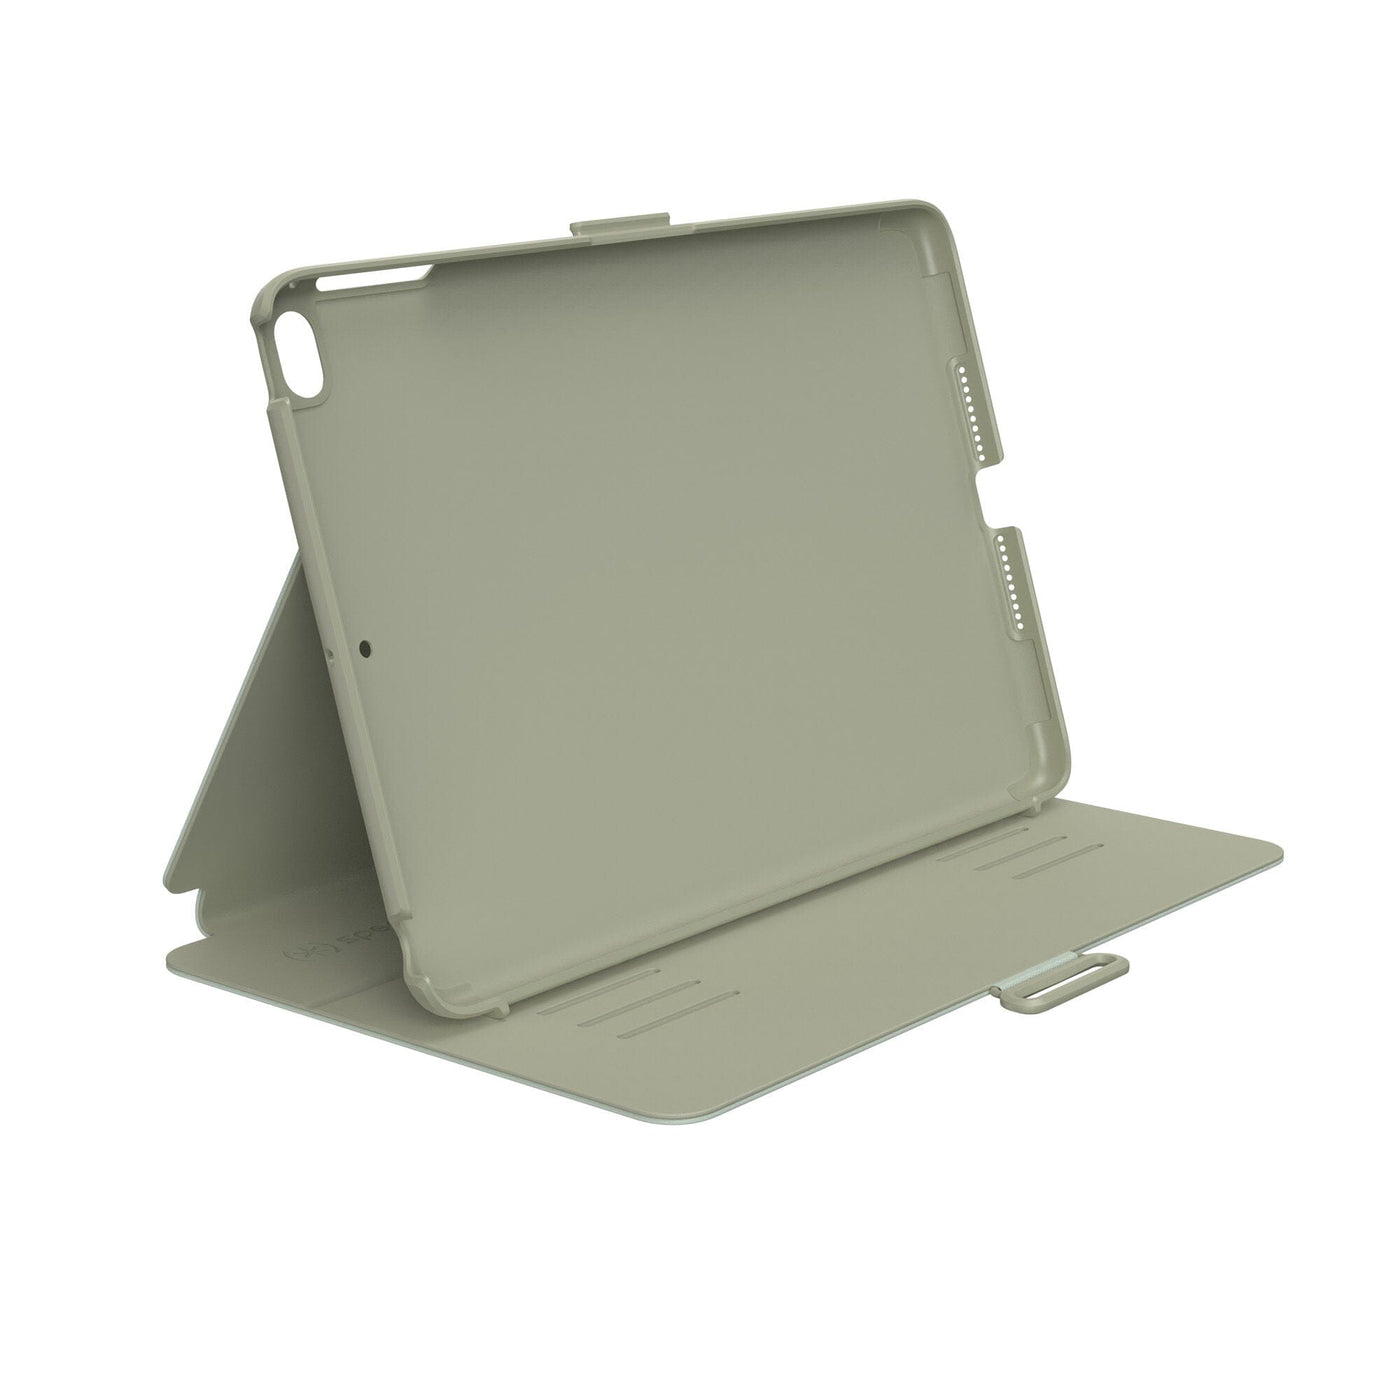 ipad 4 cases and covers